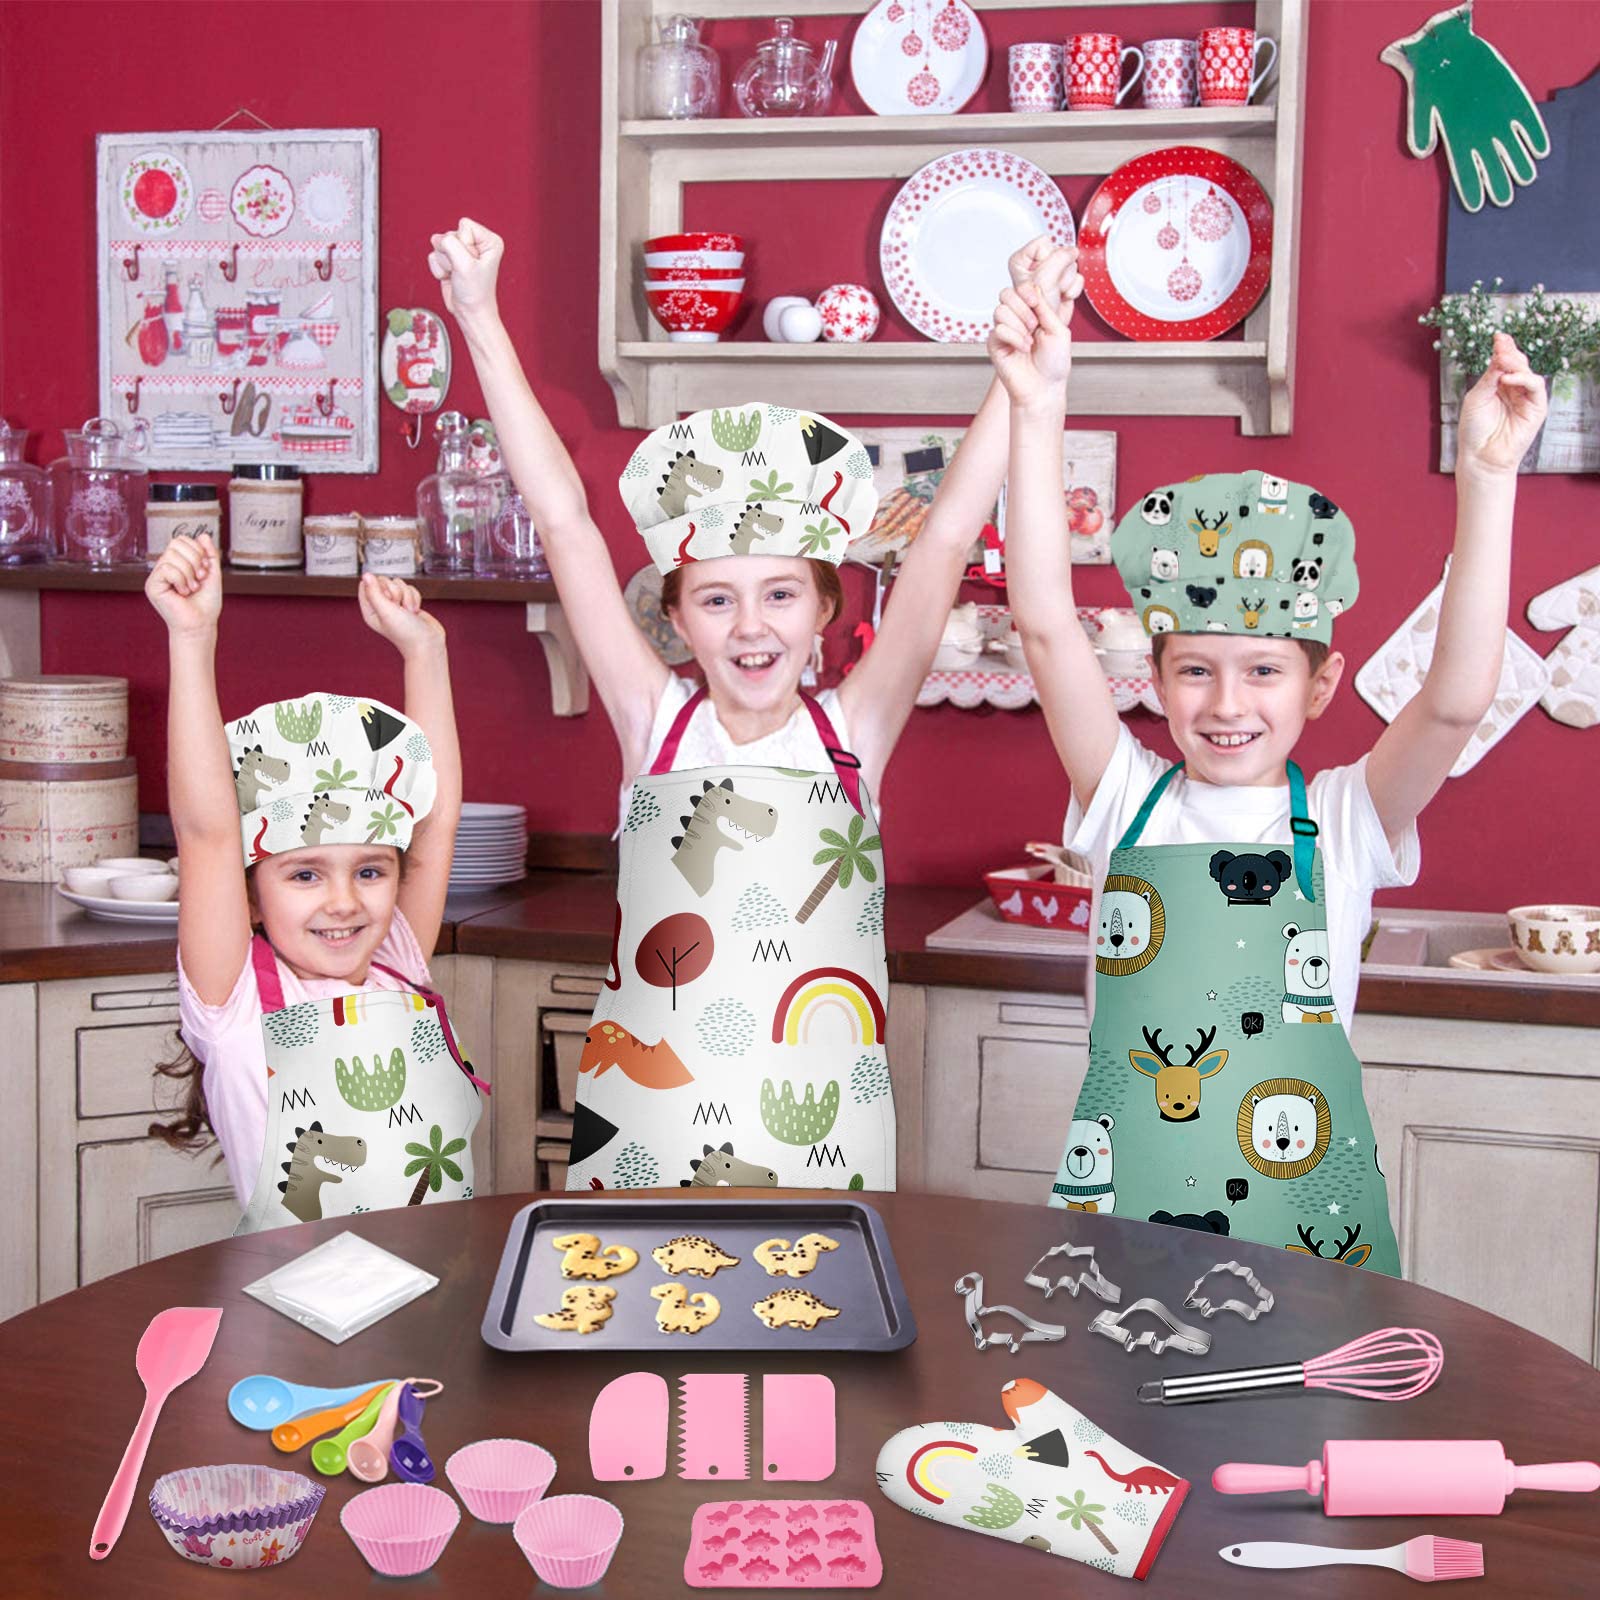 ANUXERA Kids Real Cooking and Baking Set,36Pcs Kids Chef Costume Hat and Apron Sets,Dinosaur Chef Costume for Girl, for 8-12 Year Old Girls.